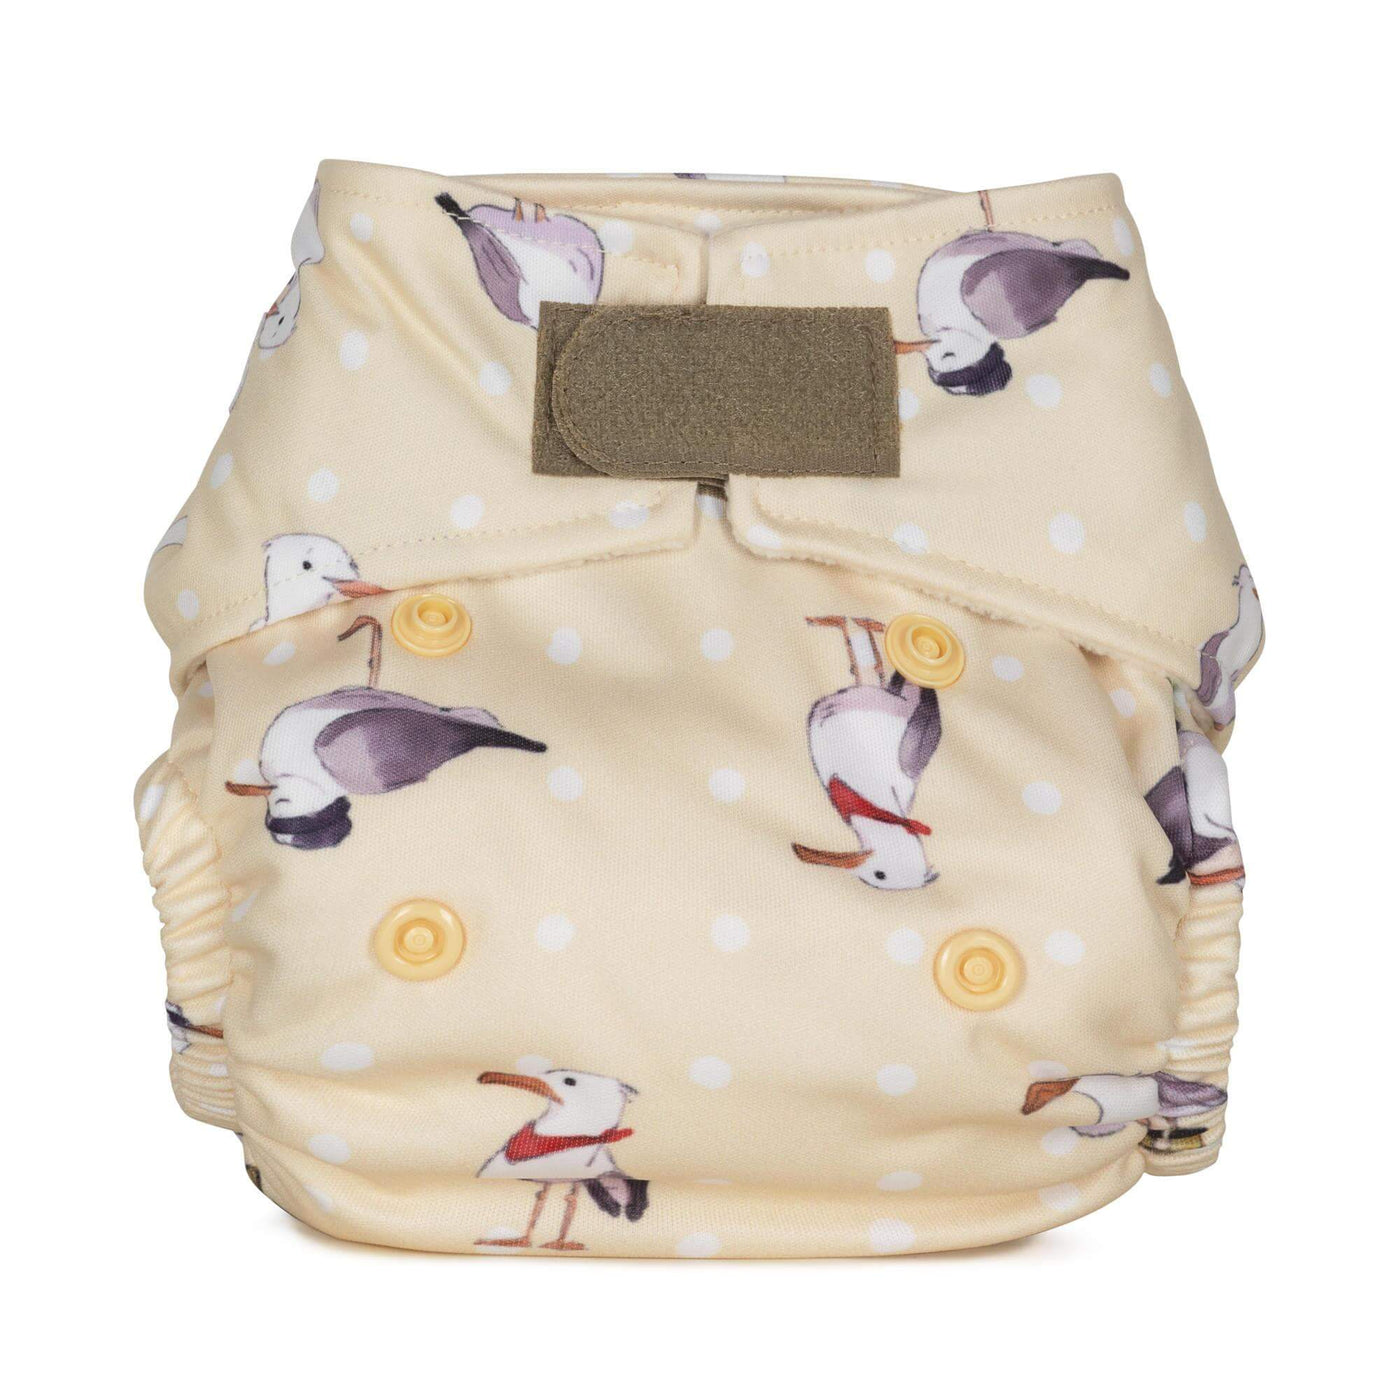 Baba + Boo Newborn Reusable Nappy - Prints Colour: Seagulls reusable nappies all in one nappies Earthlets